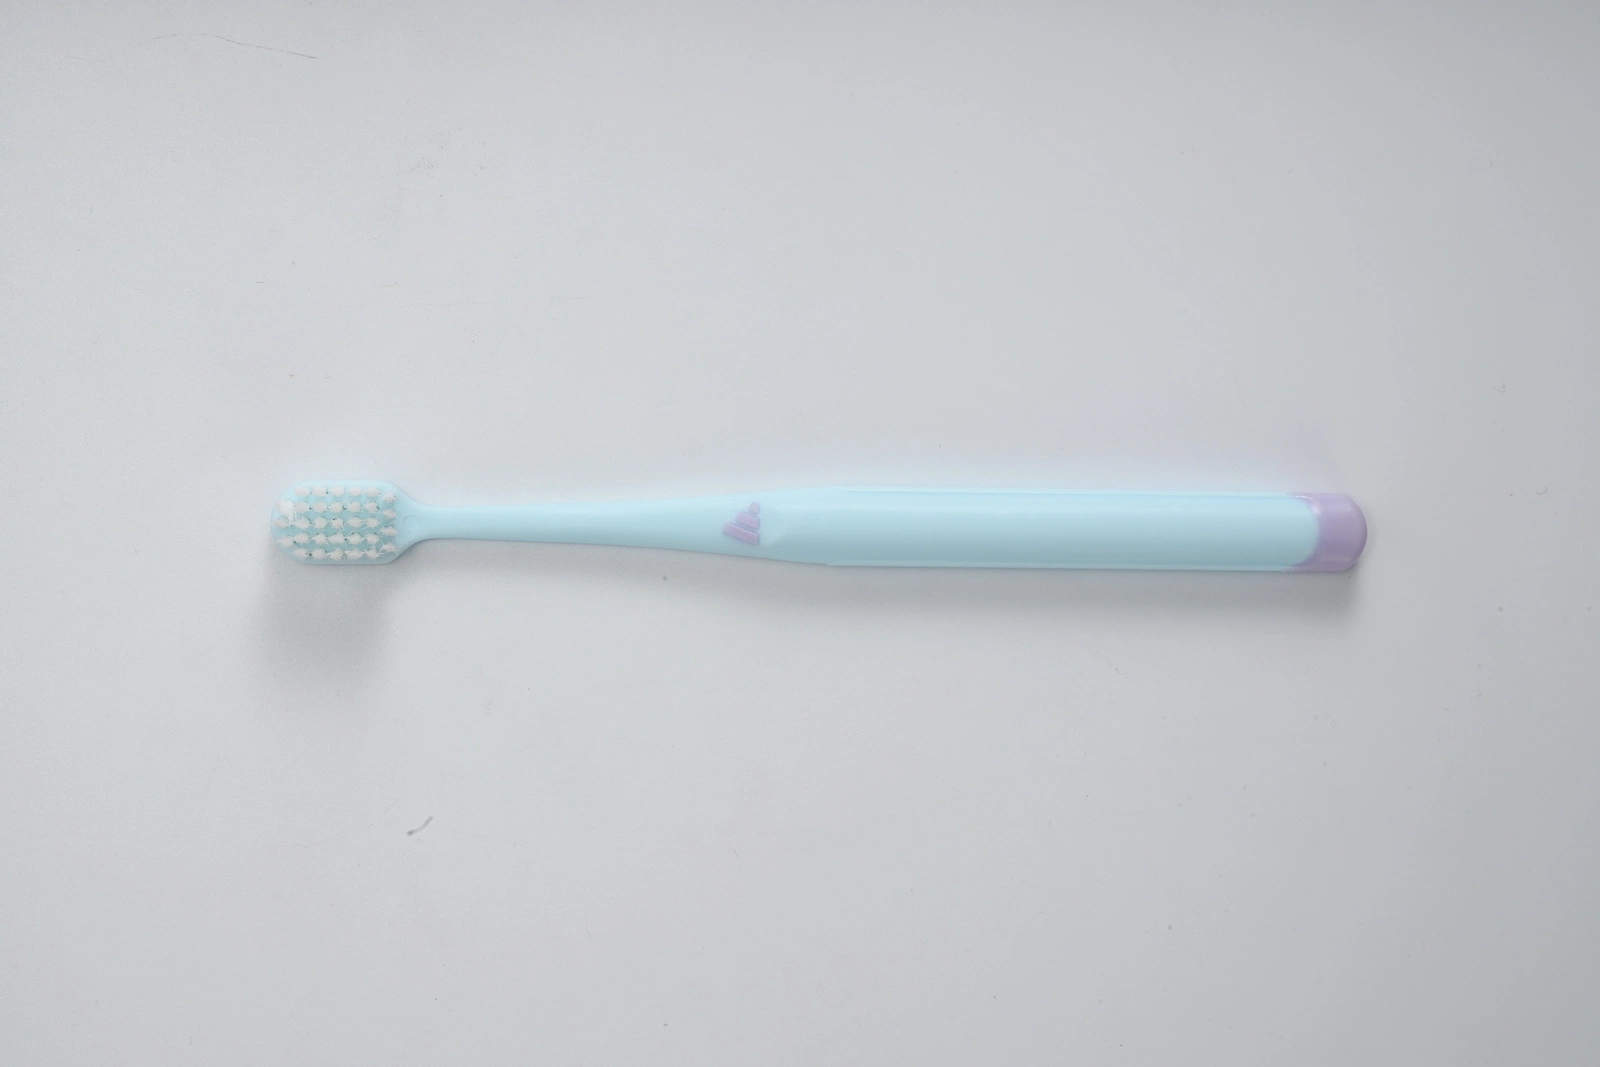 Daily Use Toothbrush for Regular Home Using